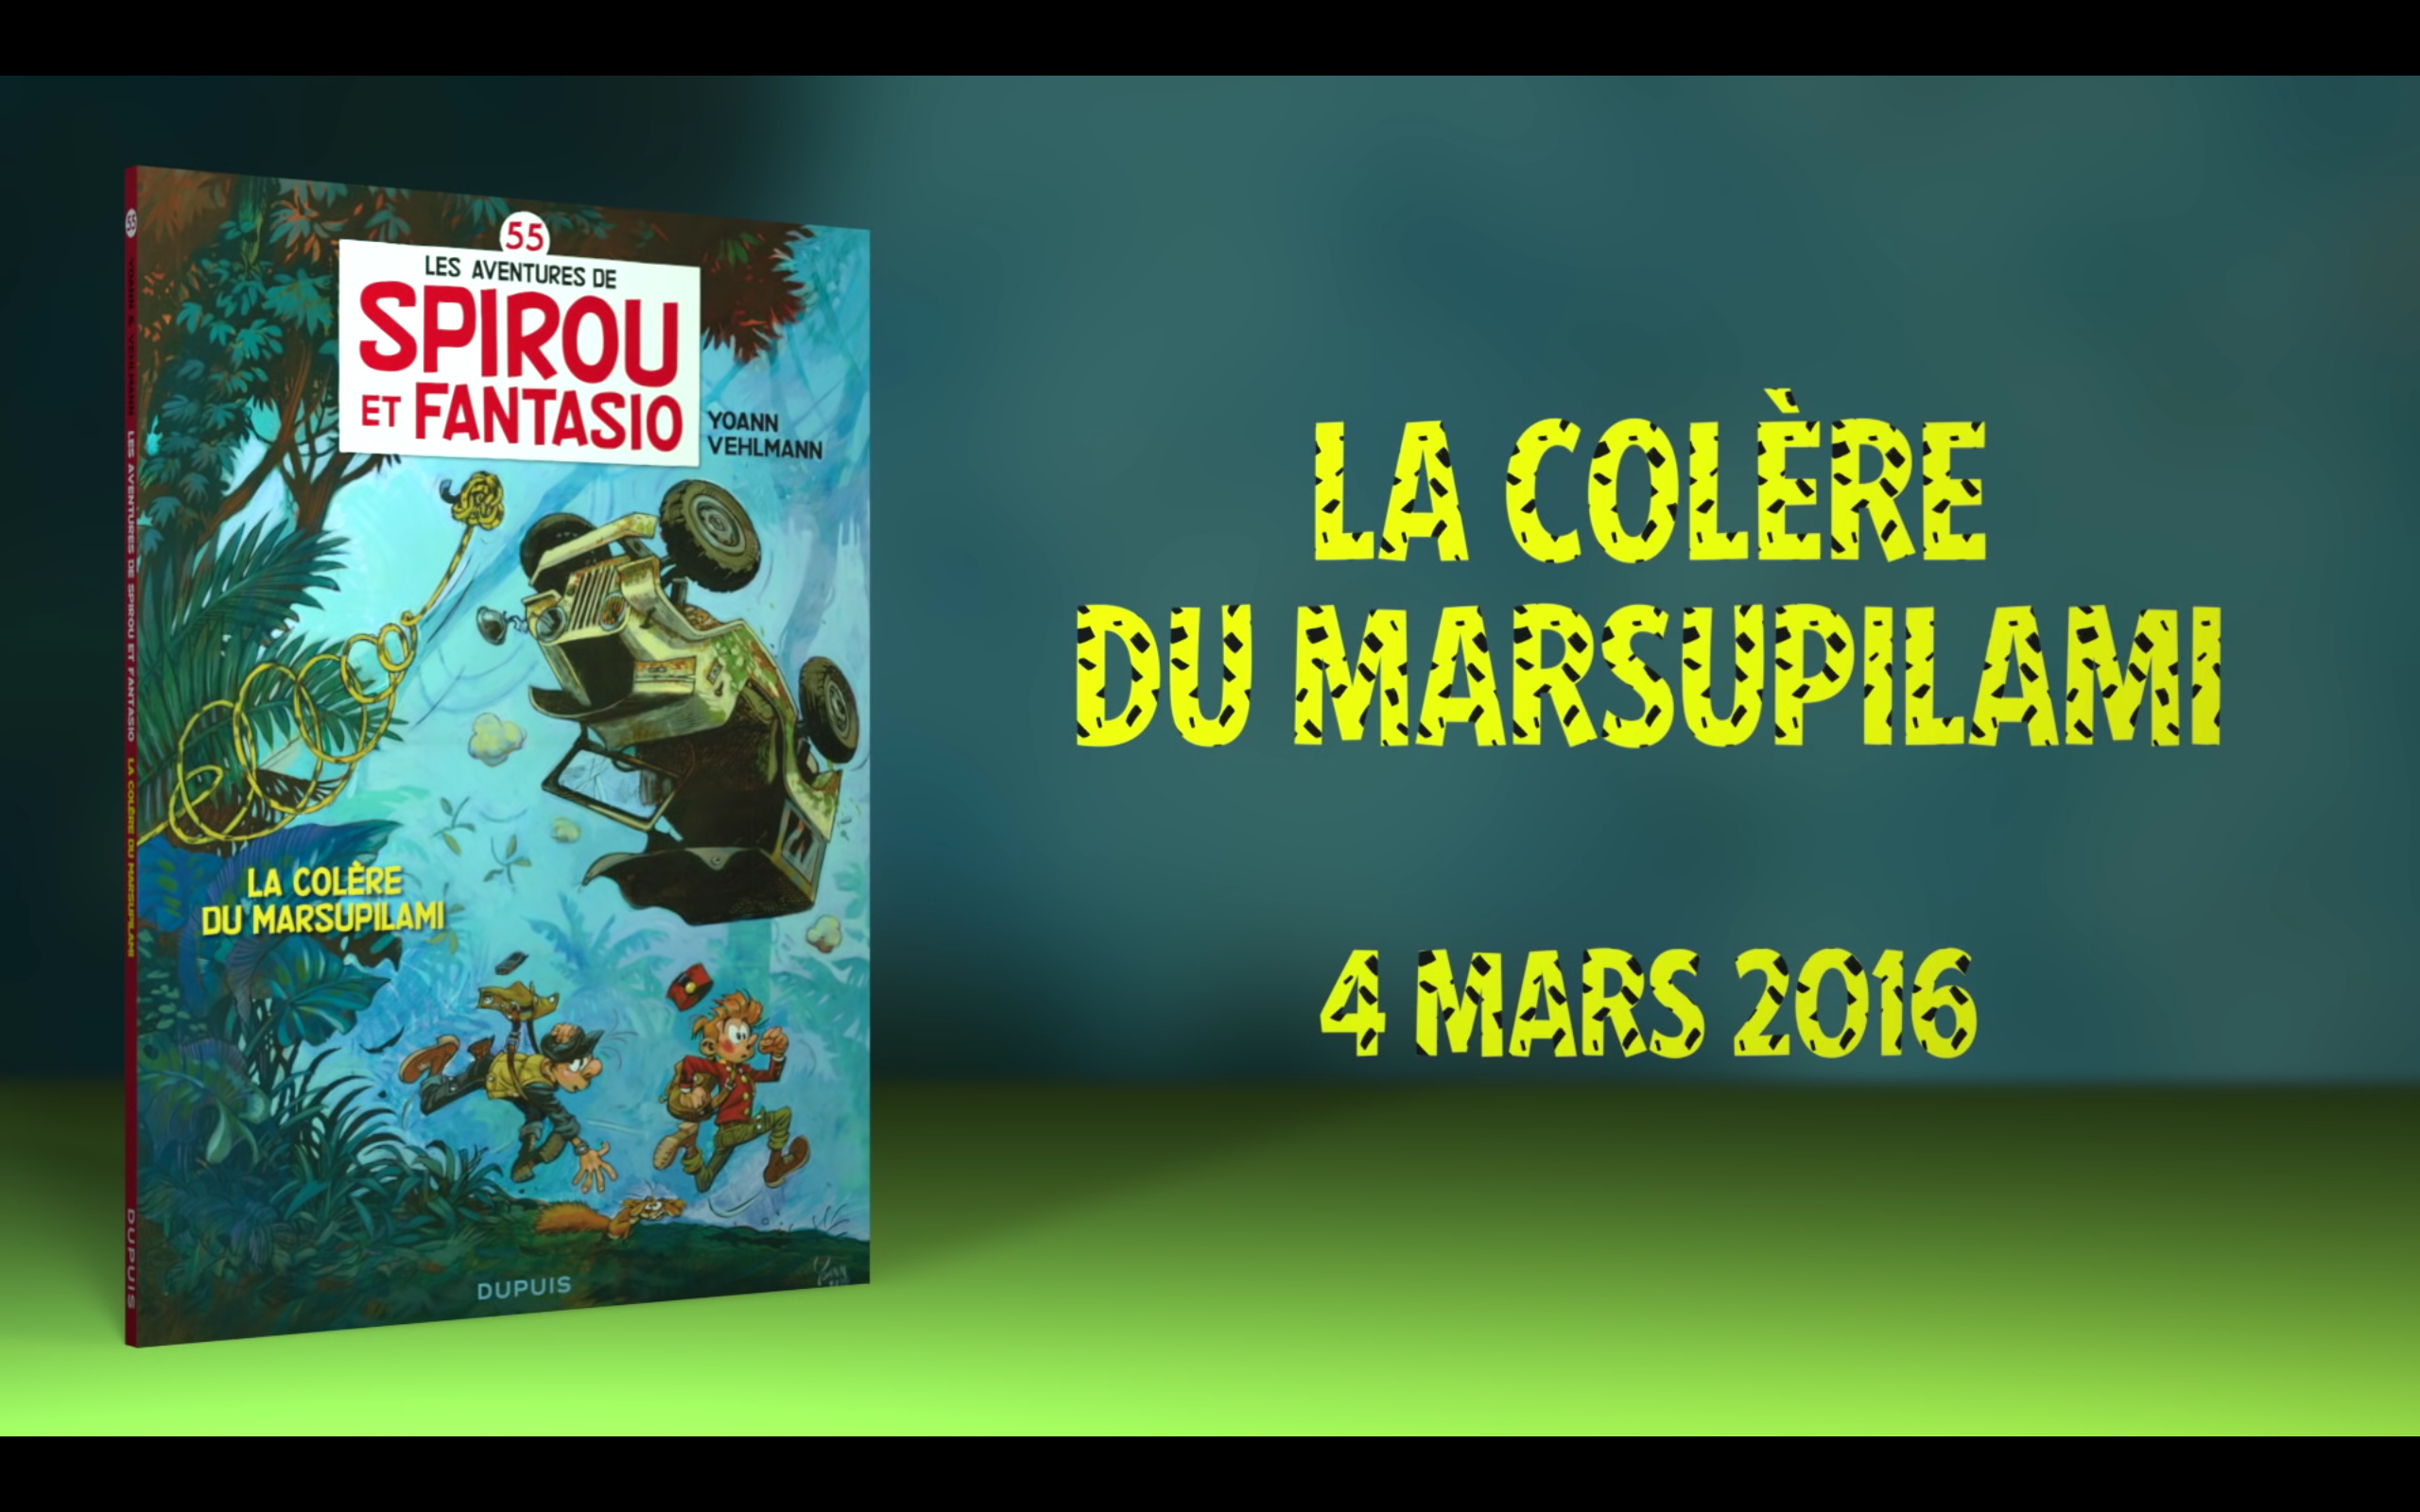 YouTube thumbnail for 'La Colère du Marsupilami' ad (ill. Yoann, Vehlmann, Dupuis; Copyright (c) 2016 Dupuis and the artists; image from youtube.com)